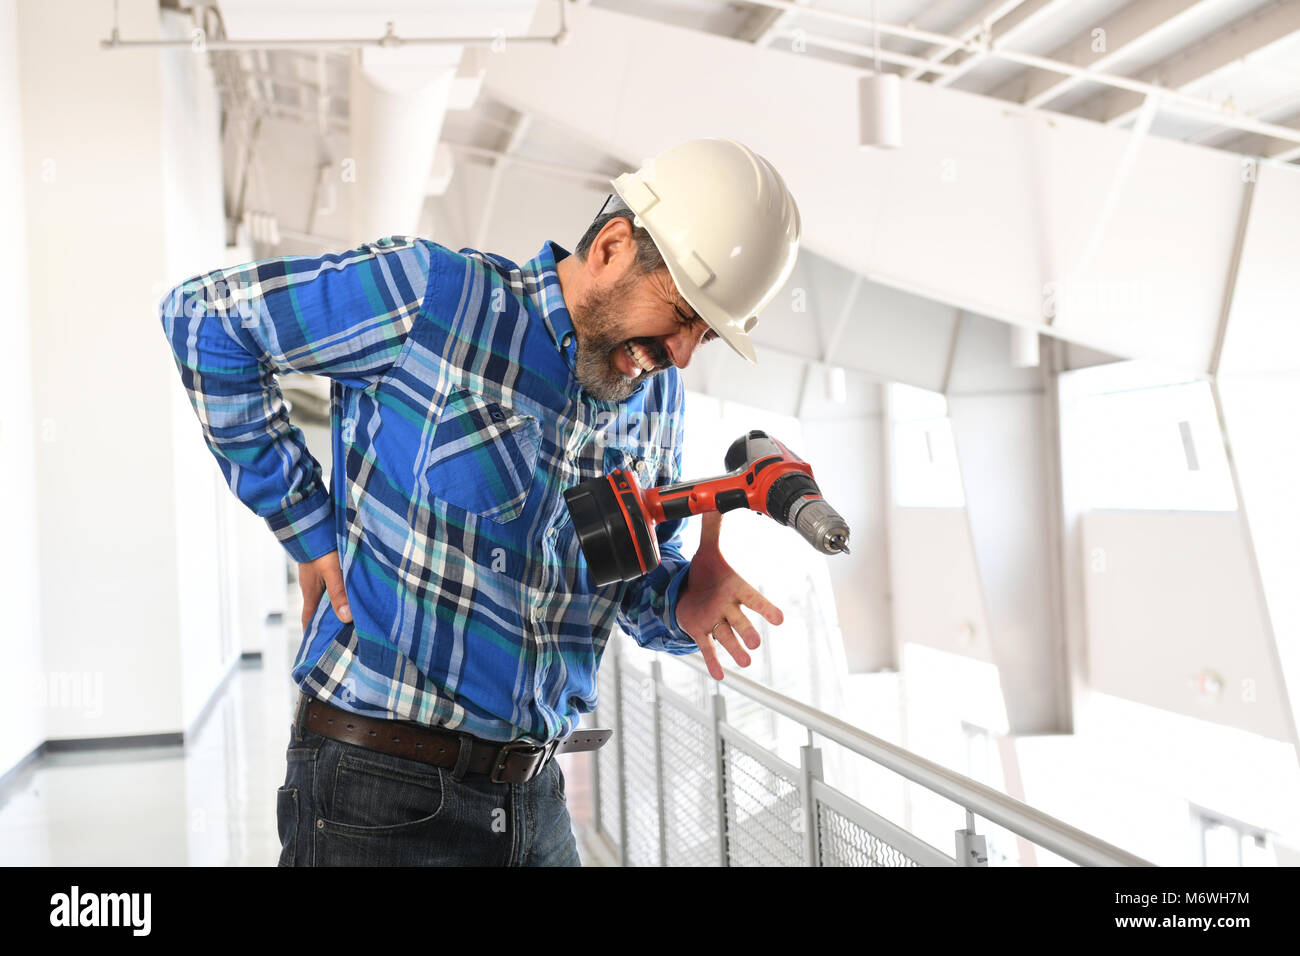 Hispanic worker getting injury to lower back inside building Stock Photo